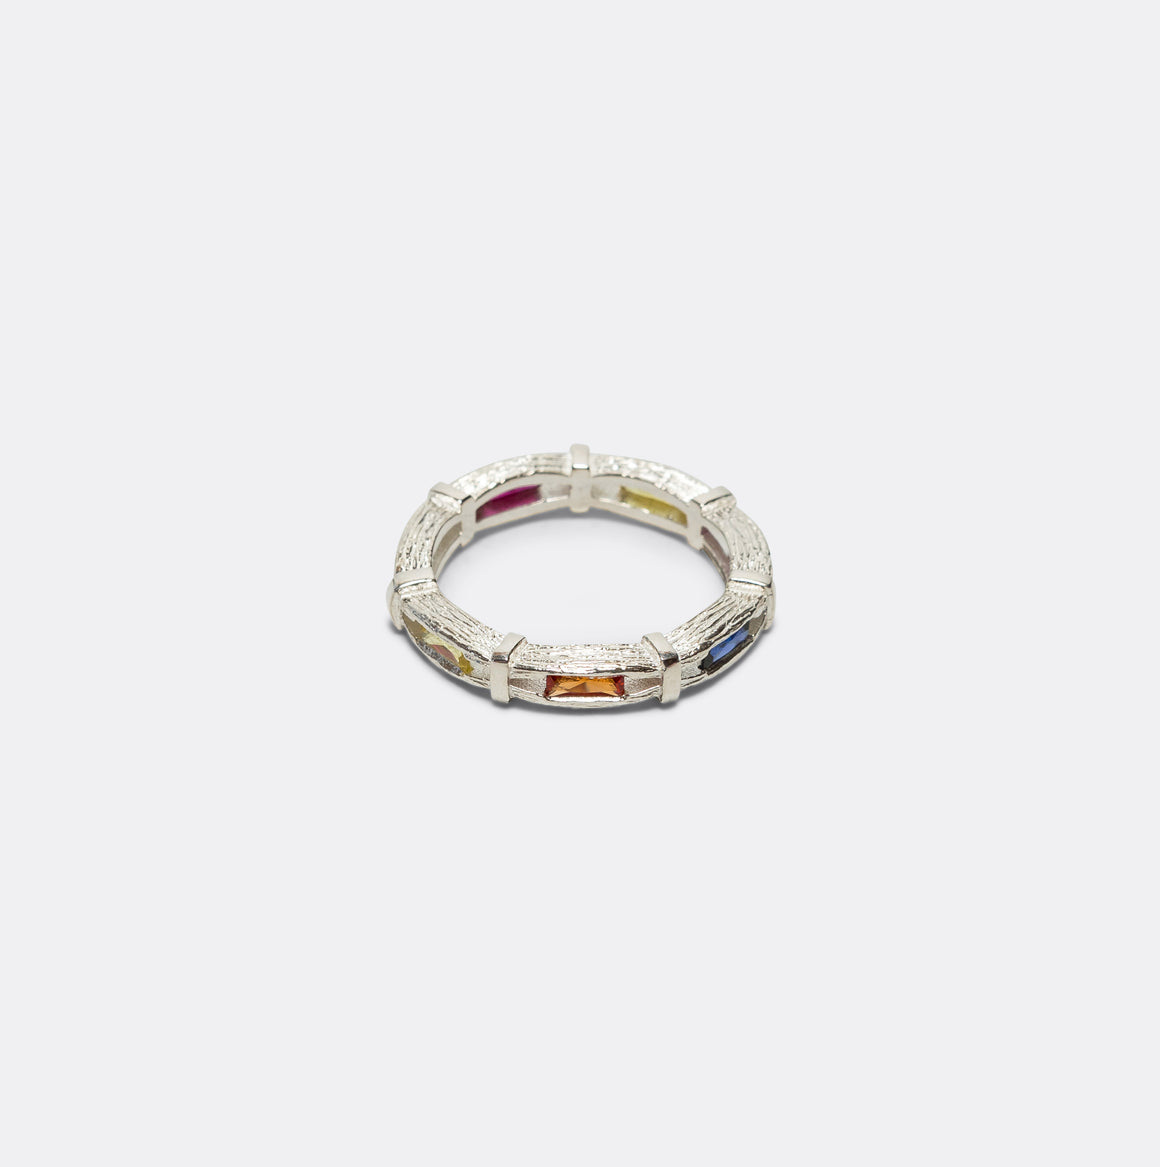 Bleue Burnham - Bound Oak Eternity Ring - 925 Silver - UP THERE